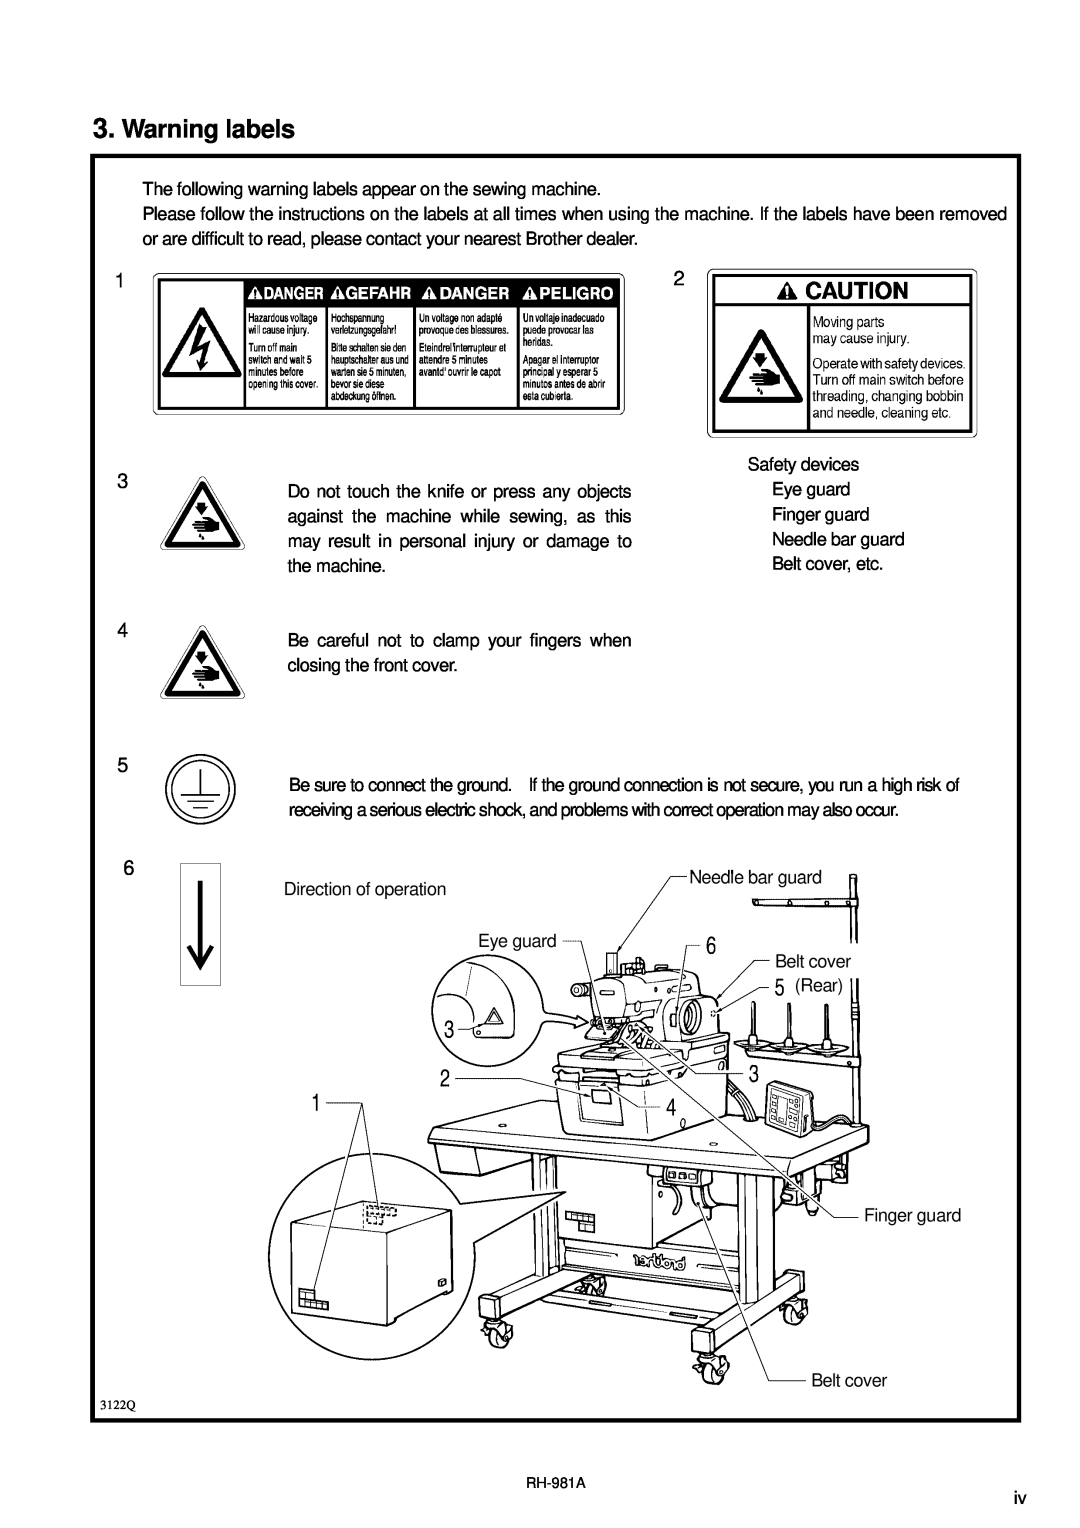 Brother rh-918a manual Warning labels 